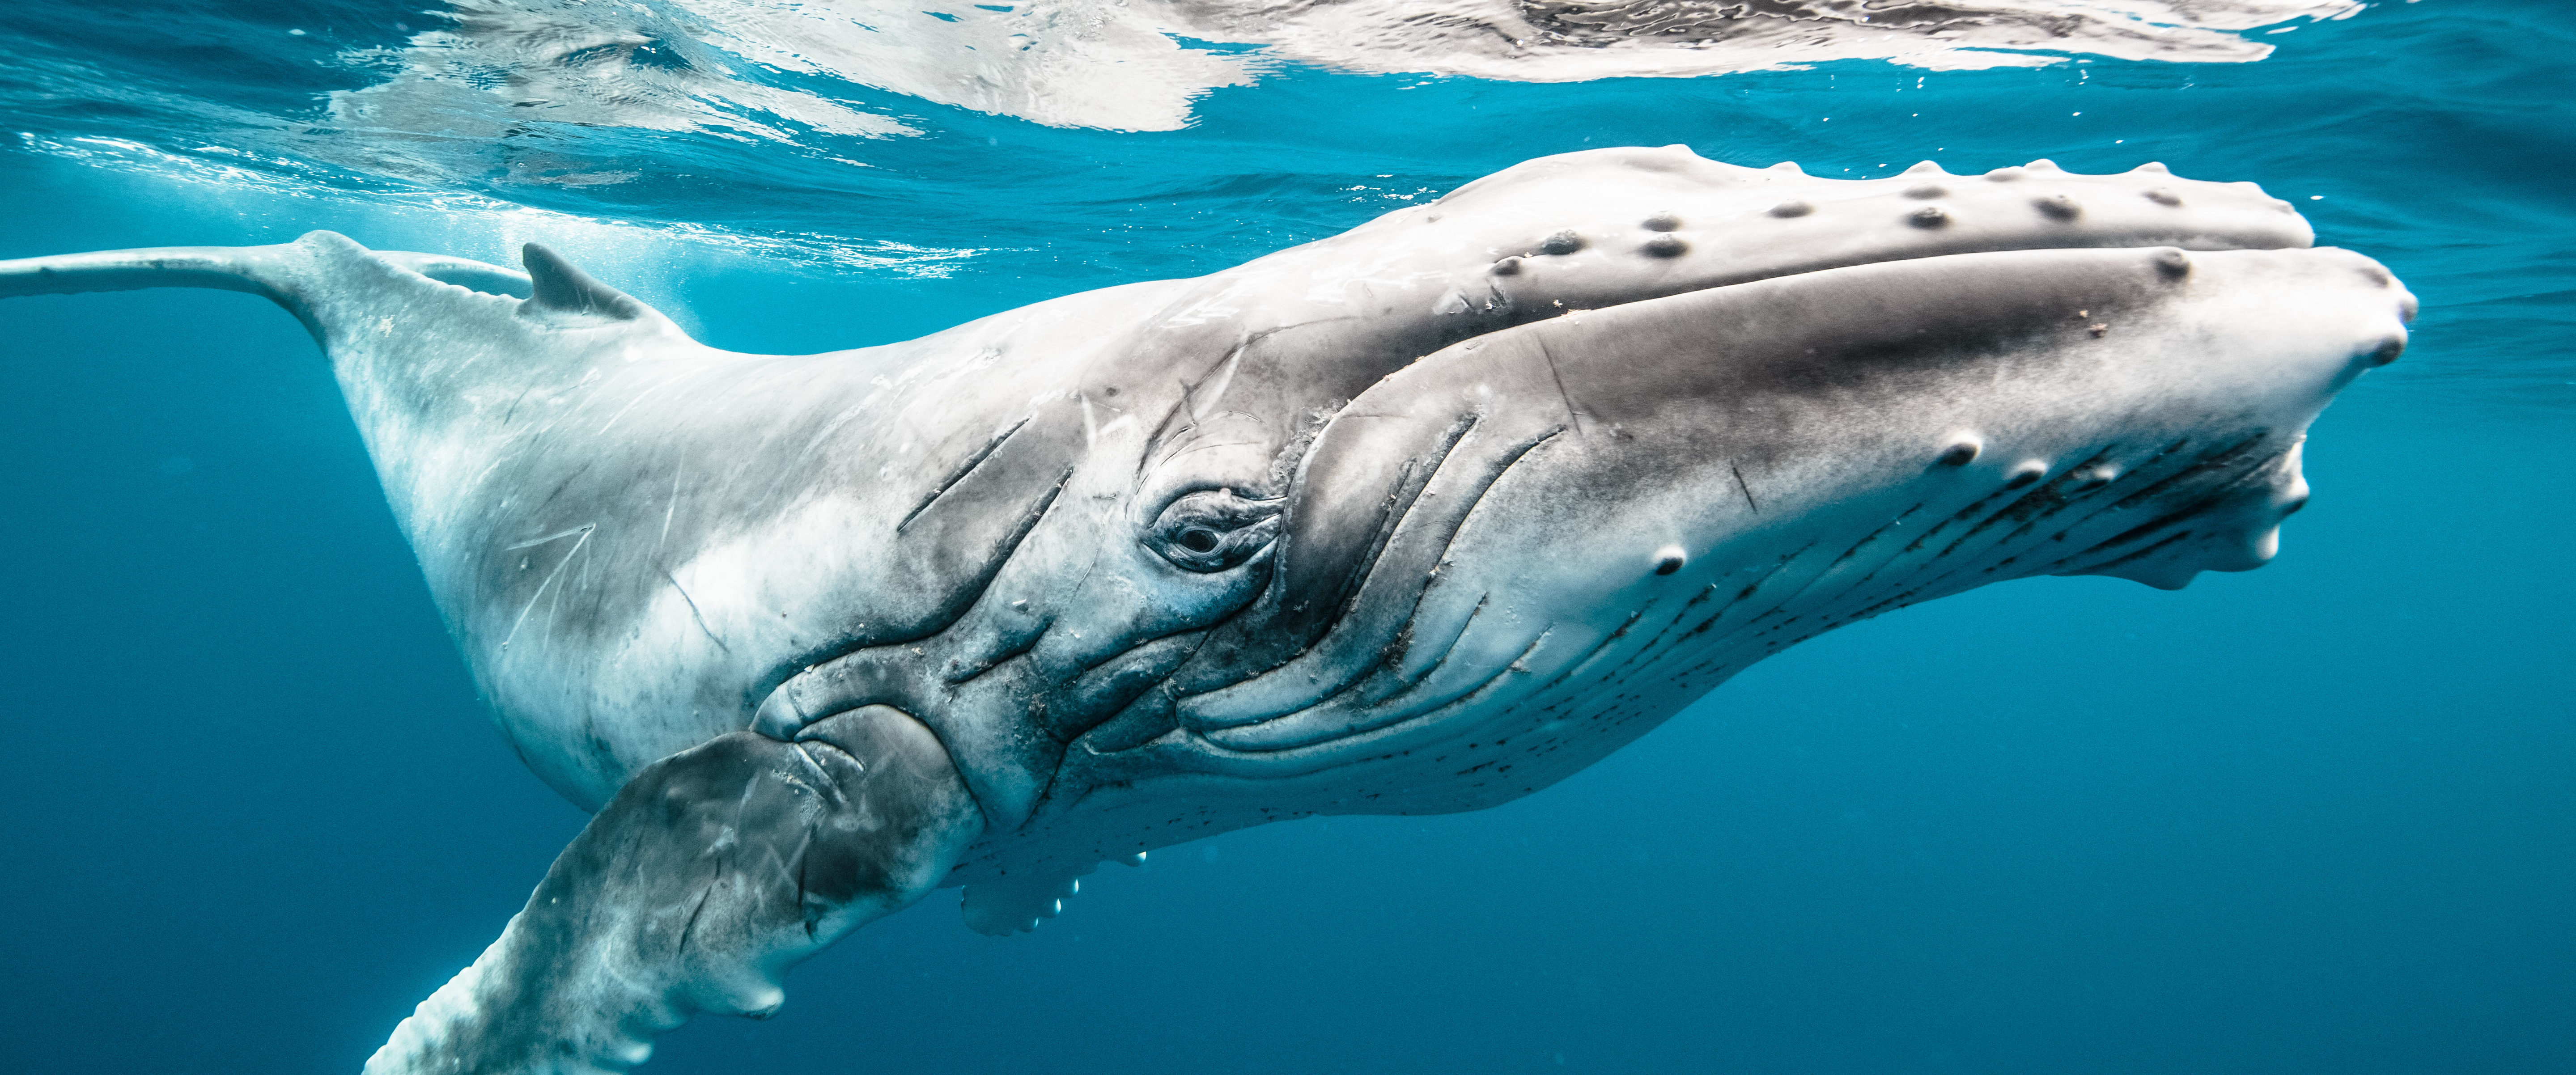 Ever dream of swimming with humpback whales? Now you can ...